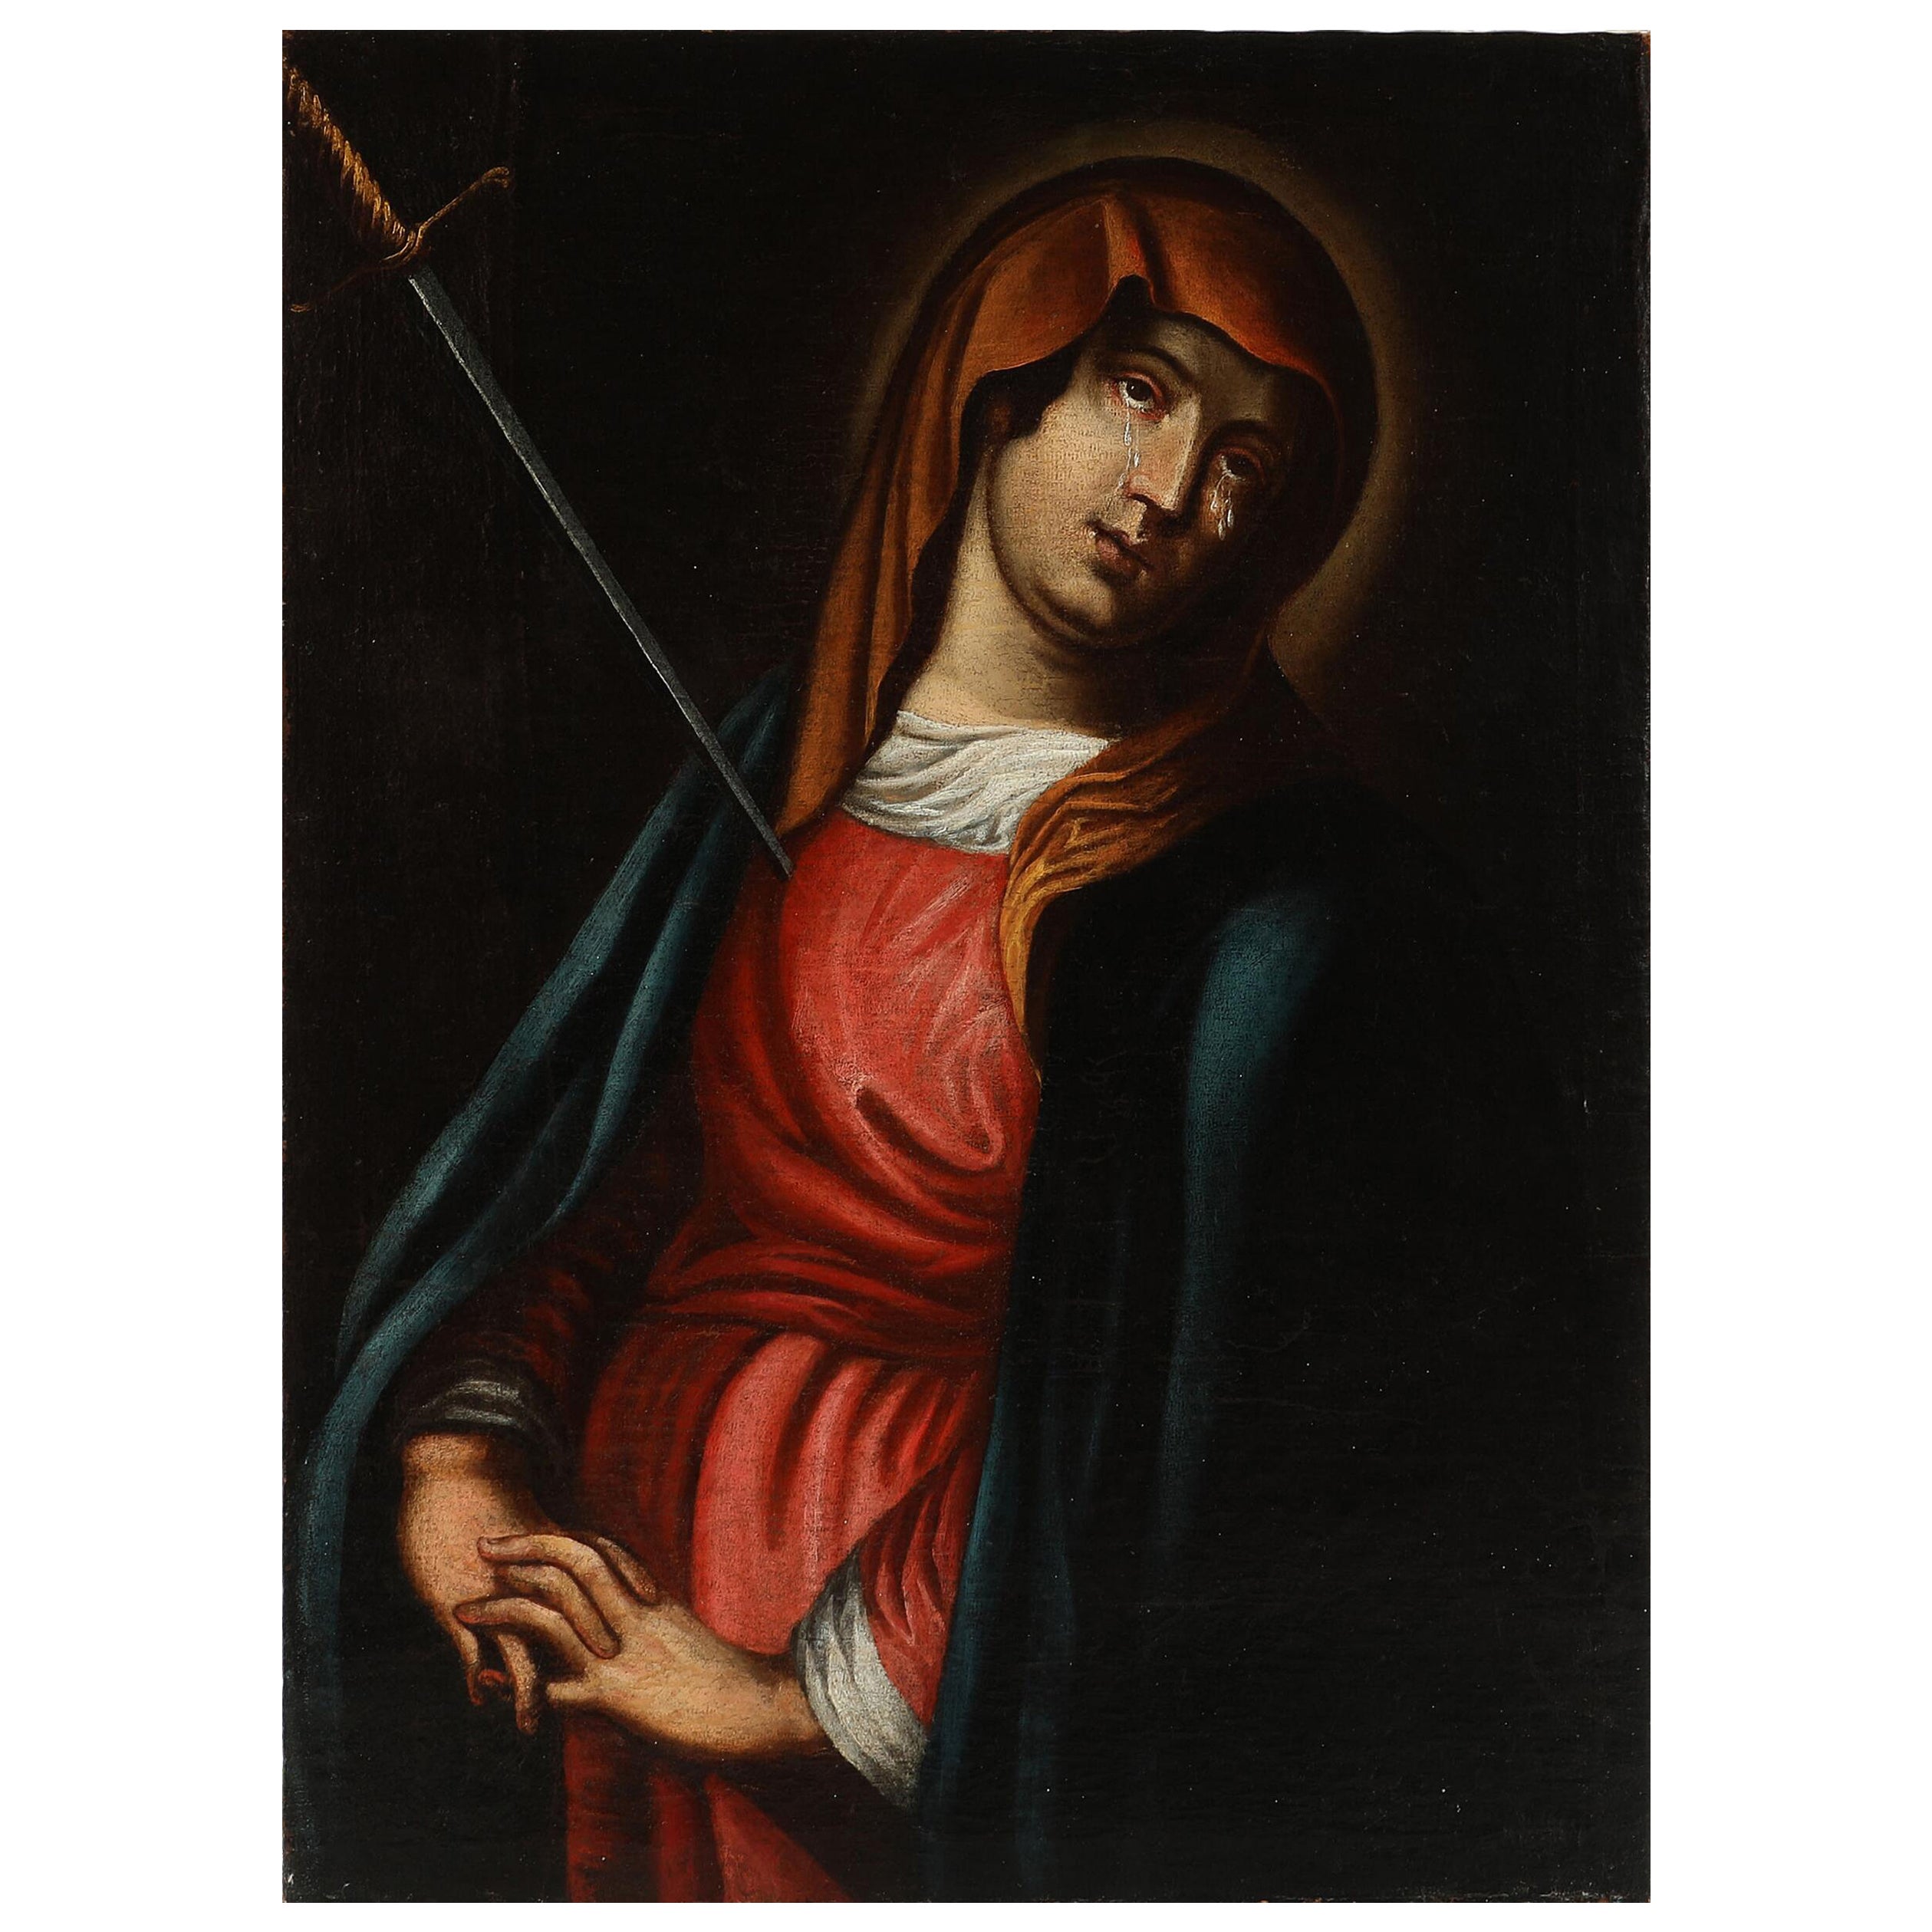 17th-18th Century the Holy Virgin Mary's Soul Being Pierced by a Sword